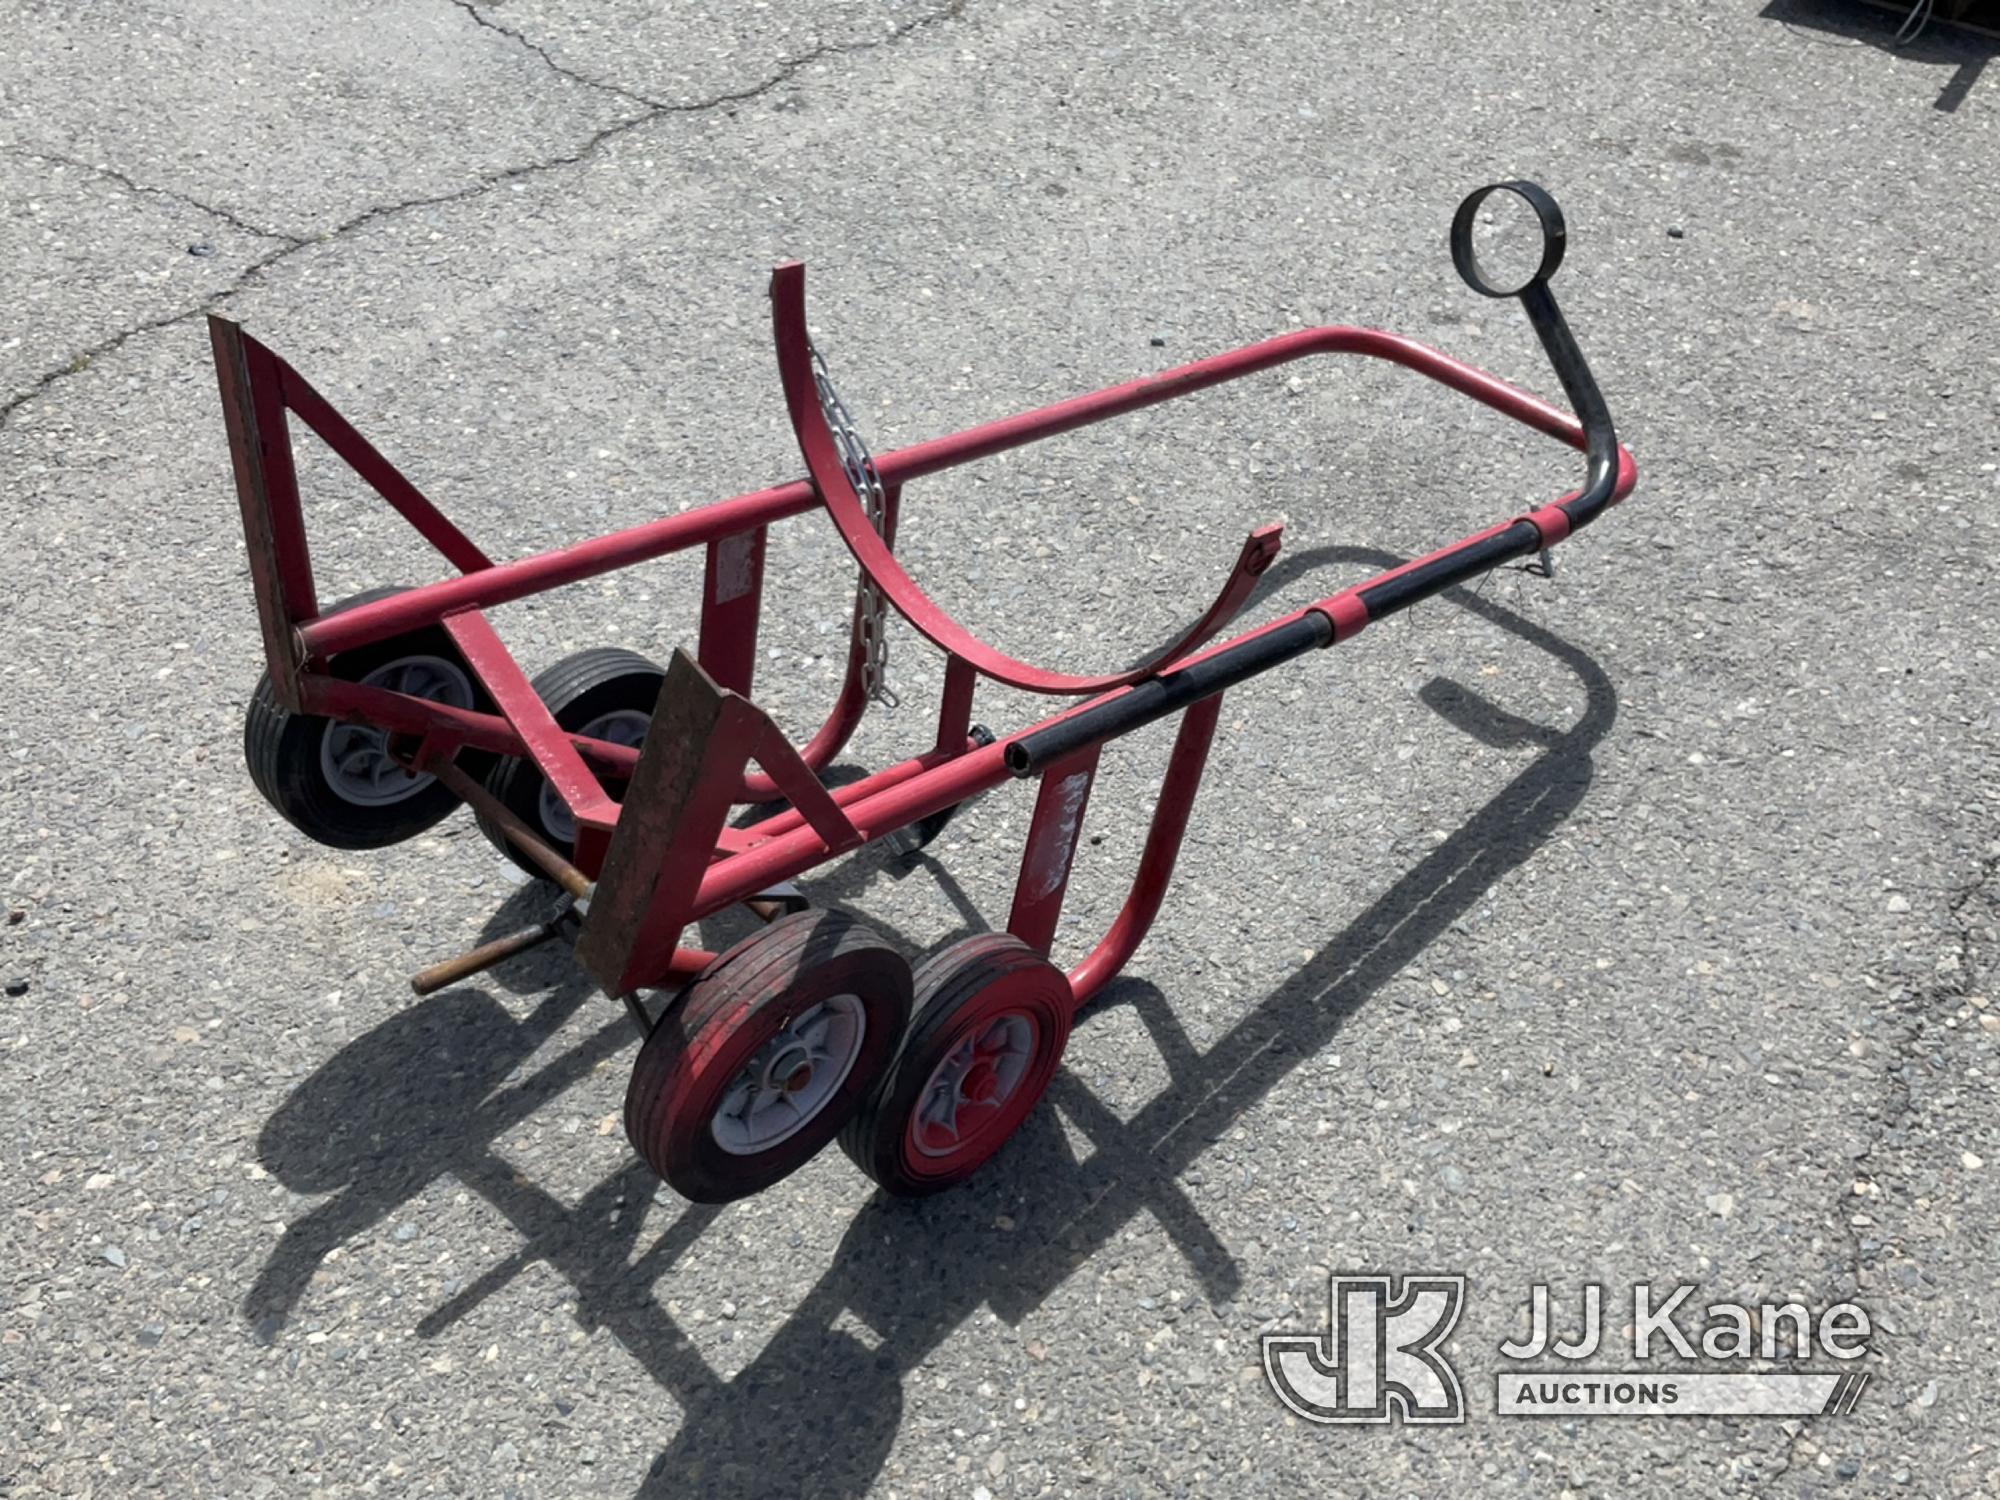 (Dixon, CA) Cylinder Hand Dolly (Used) NOTE: This unit is being sold AS IS/WHERE IS via Timed Auctio